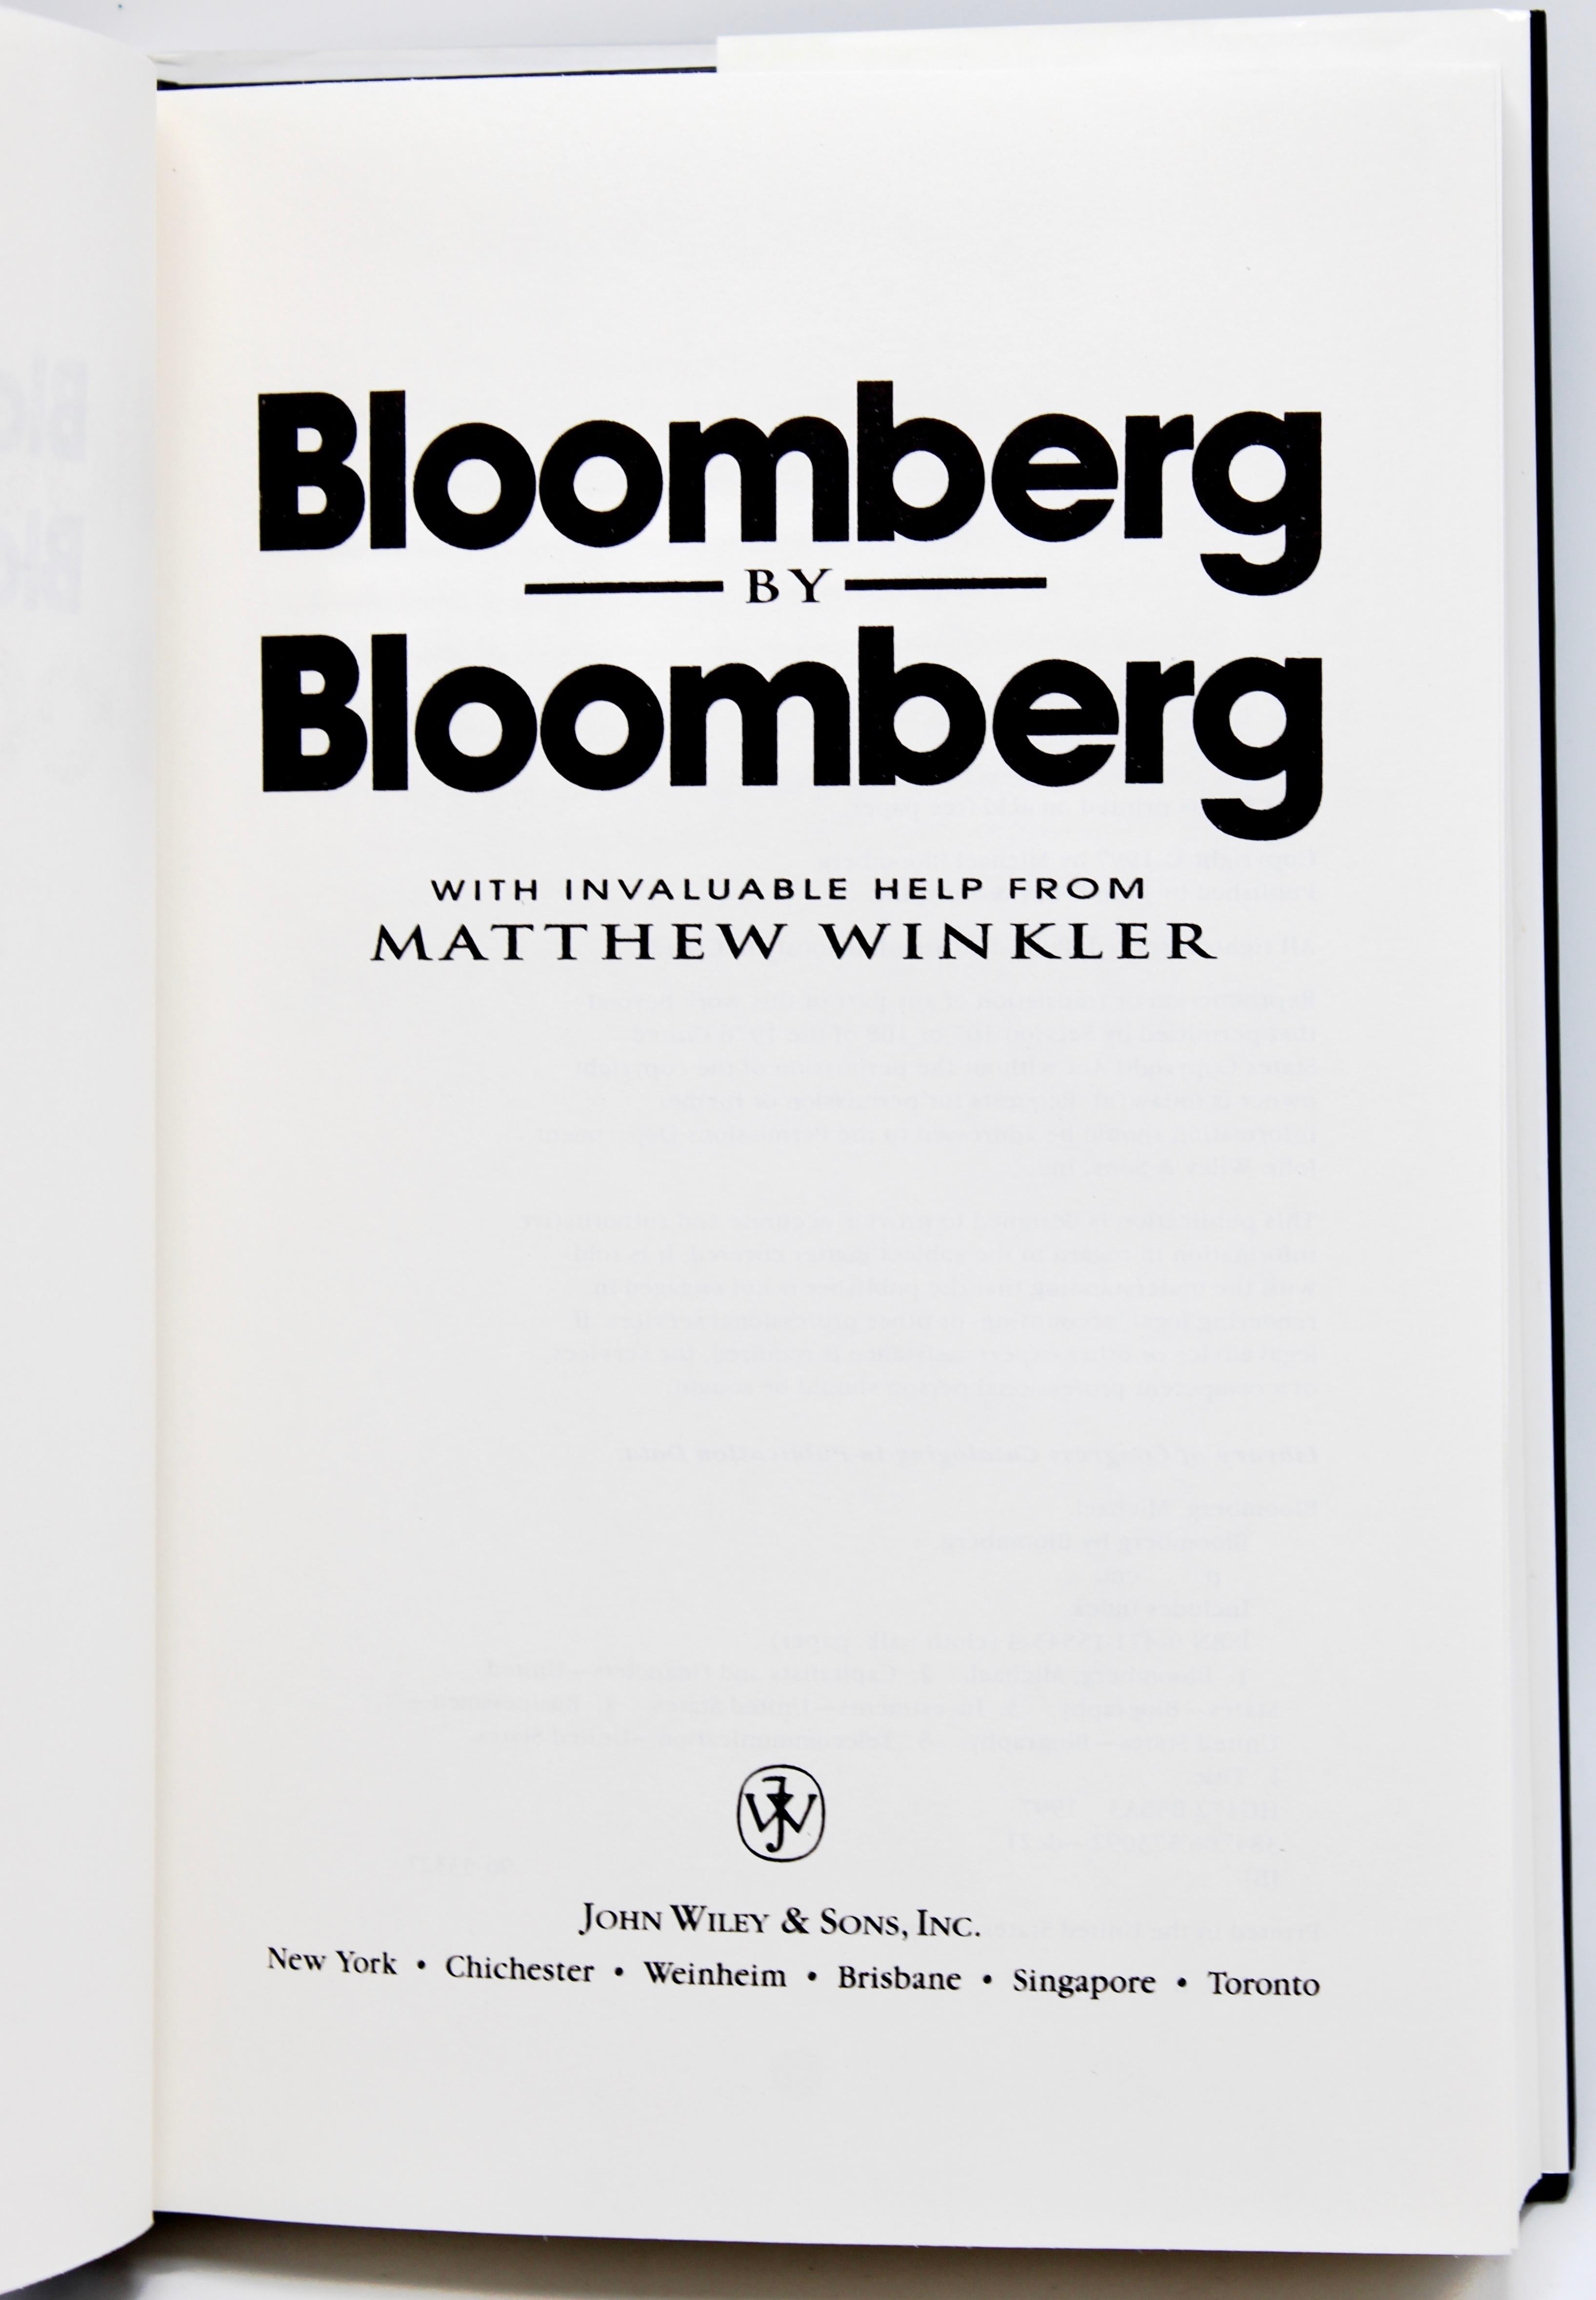 American Bloomberg by Bloomberg, Signed First Edition Book, 1997